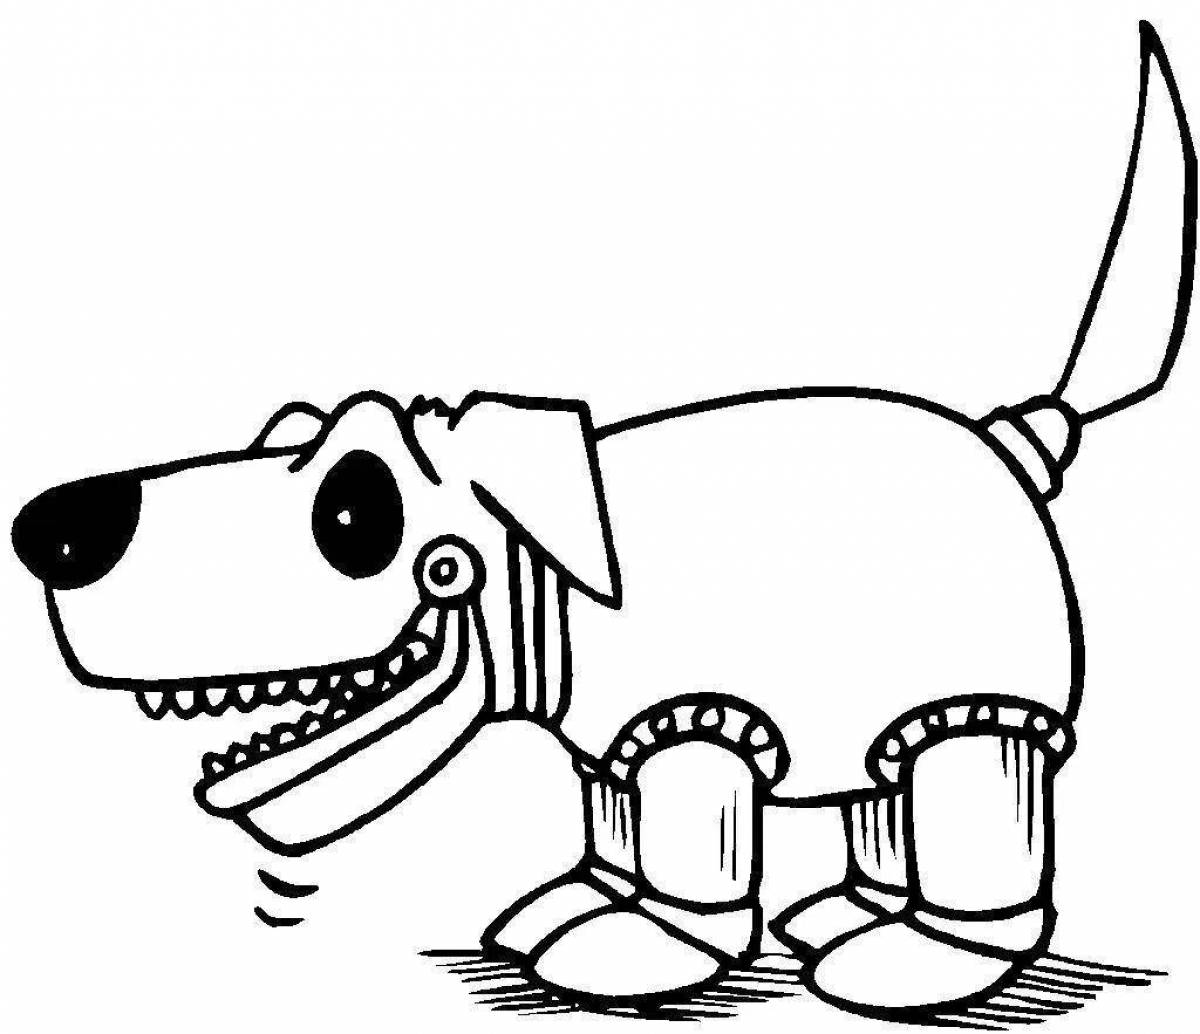 Adorable robot dog coloring page